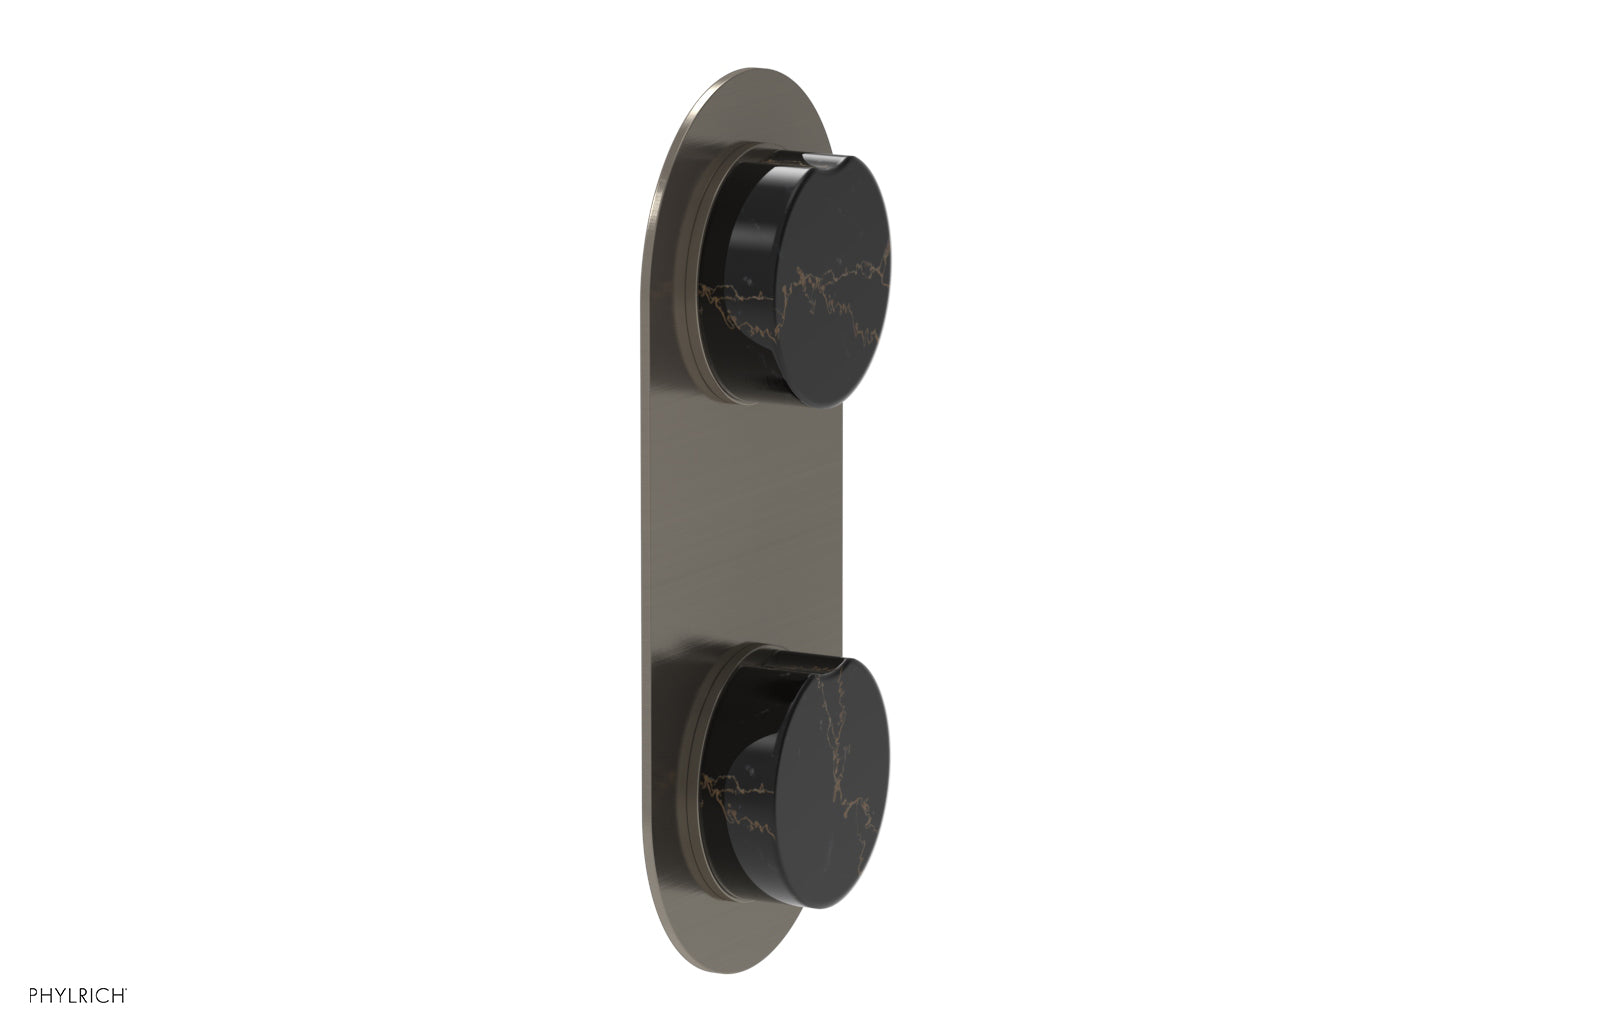 Phylrich CIRC Thermostatic Valve with Volume Control or Diverter - Black Marble Handle